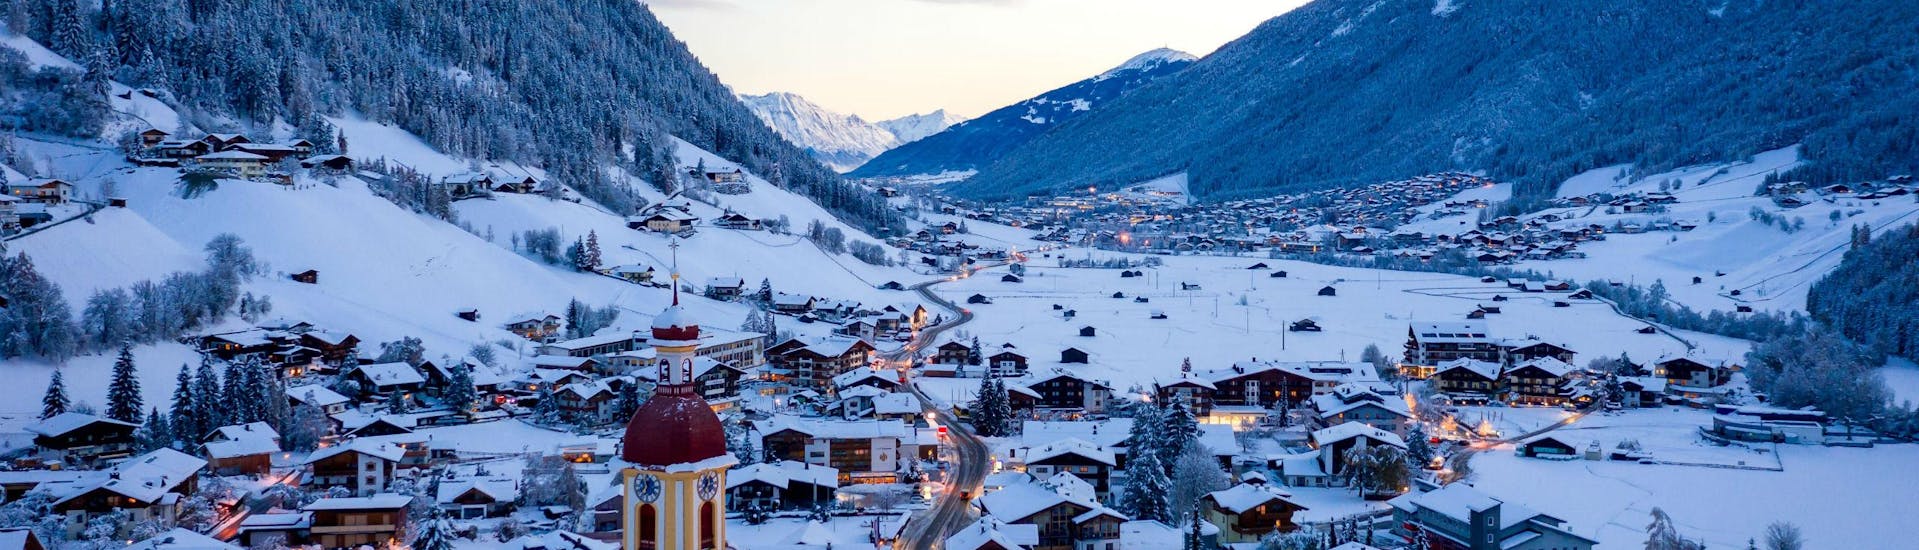 An image of the the tyrolean village of Neustift in the Stubai Valley, where local ski schools offer ski lessons to those who want to learn to ski.